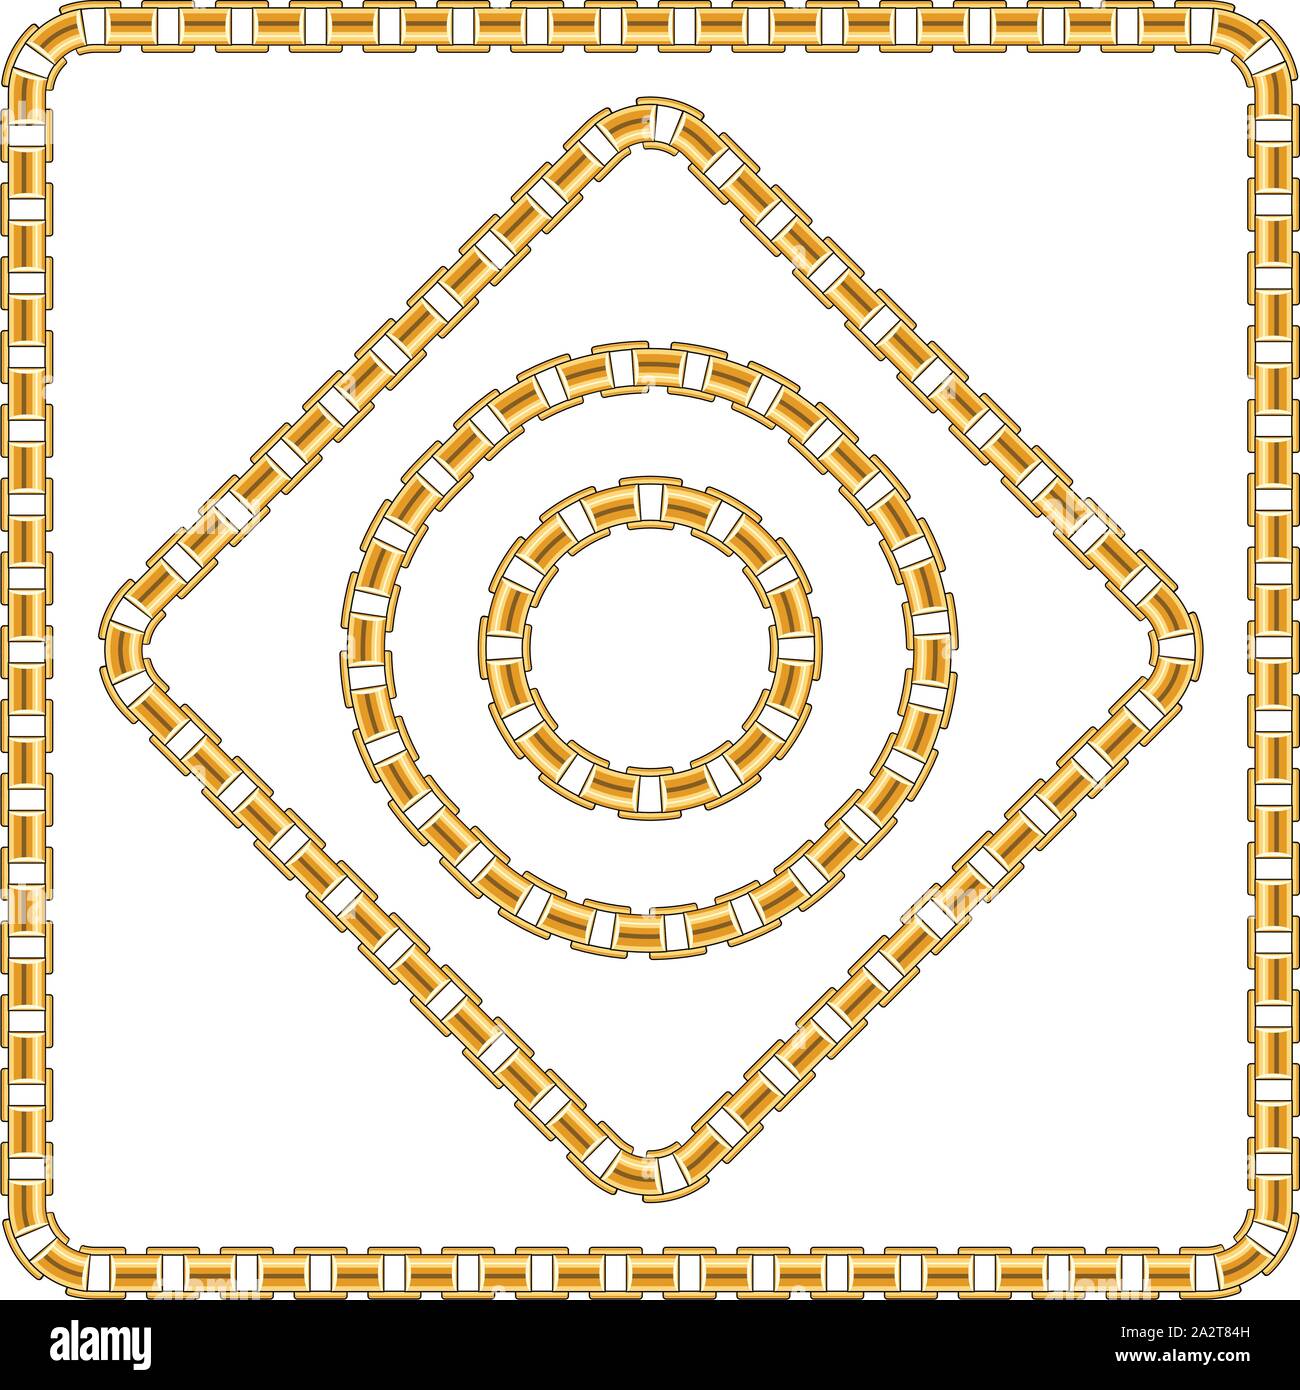 Precious Chains with a White Background. Luxury Square and Circle Golden Chains Vector Illustration. Ready for Textile Print. Set 12. Stock Vector